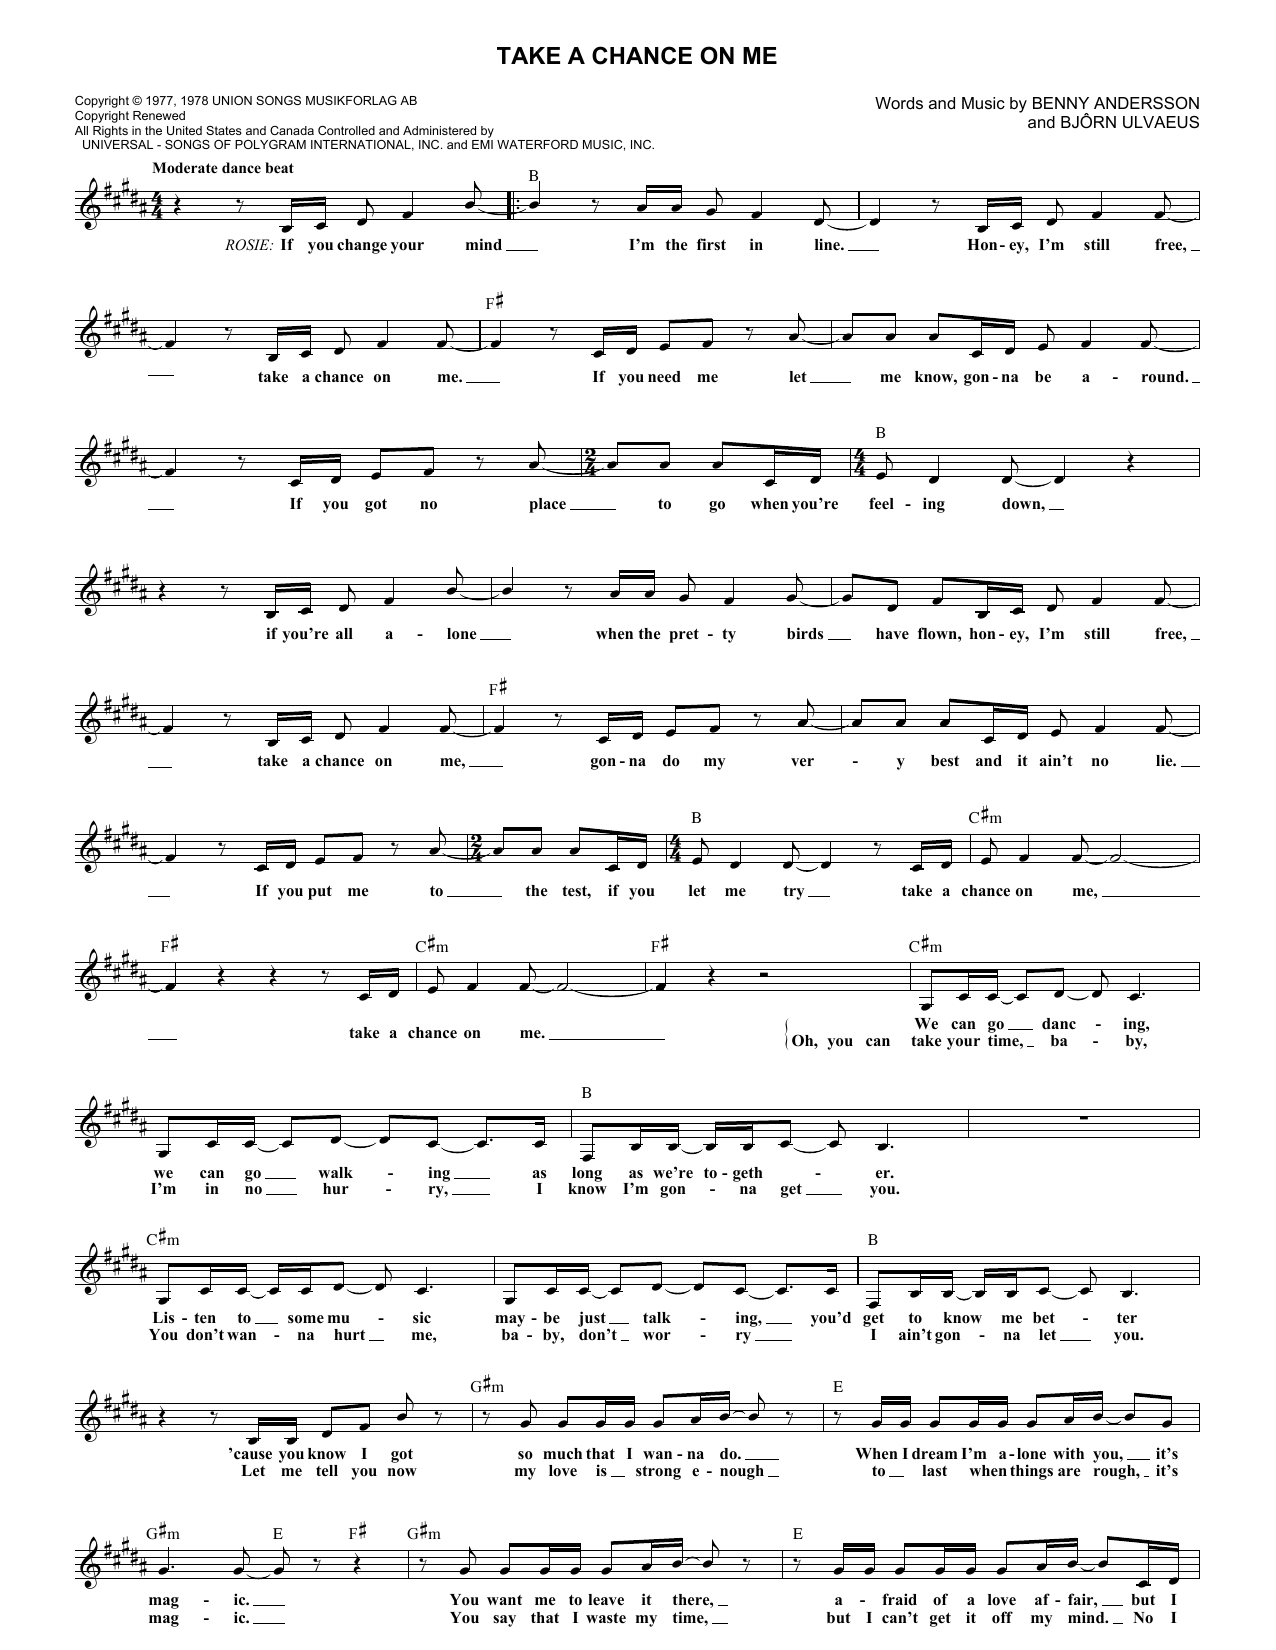 On Me Broadway sheet music, notes and chords for Melody Line, Lyrics & ...